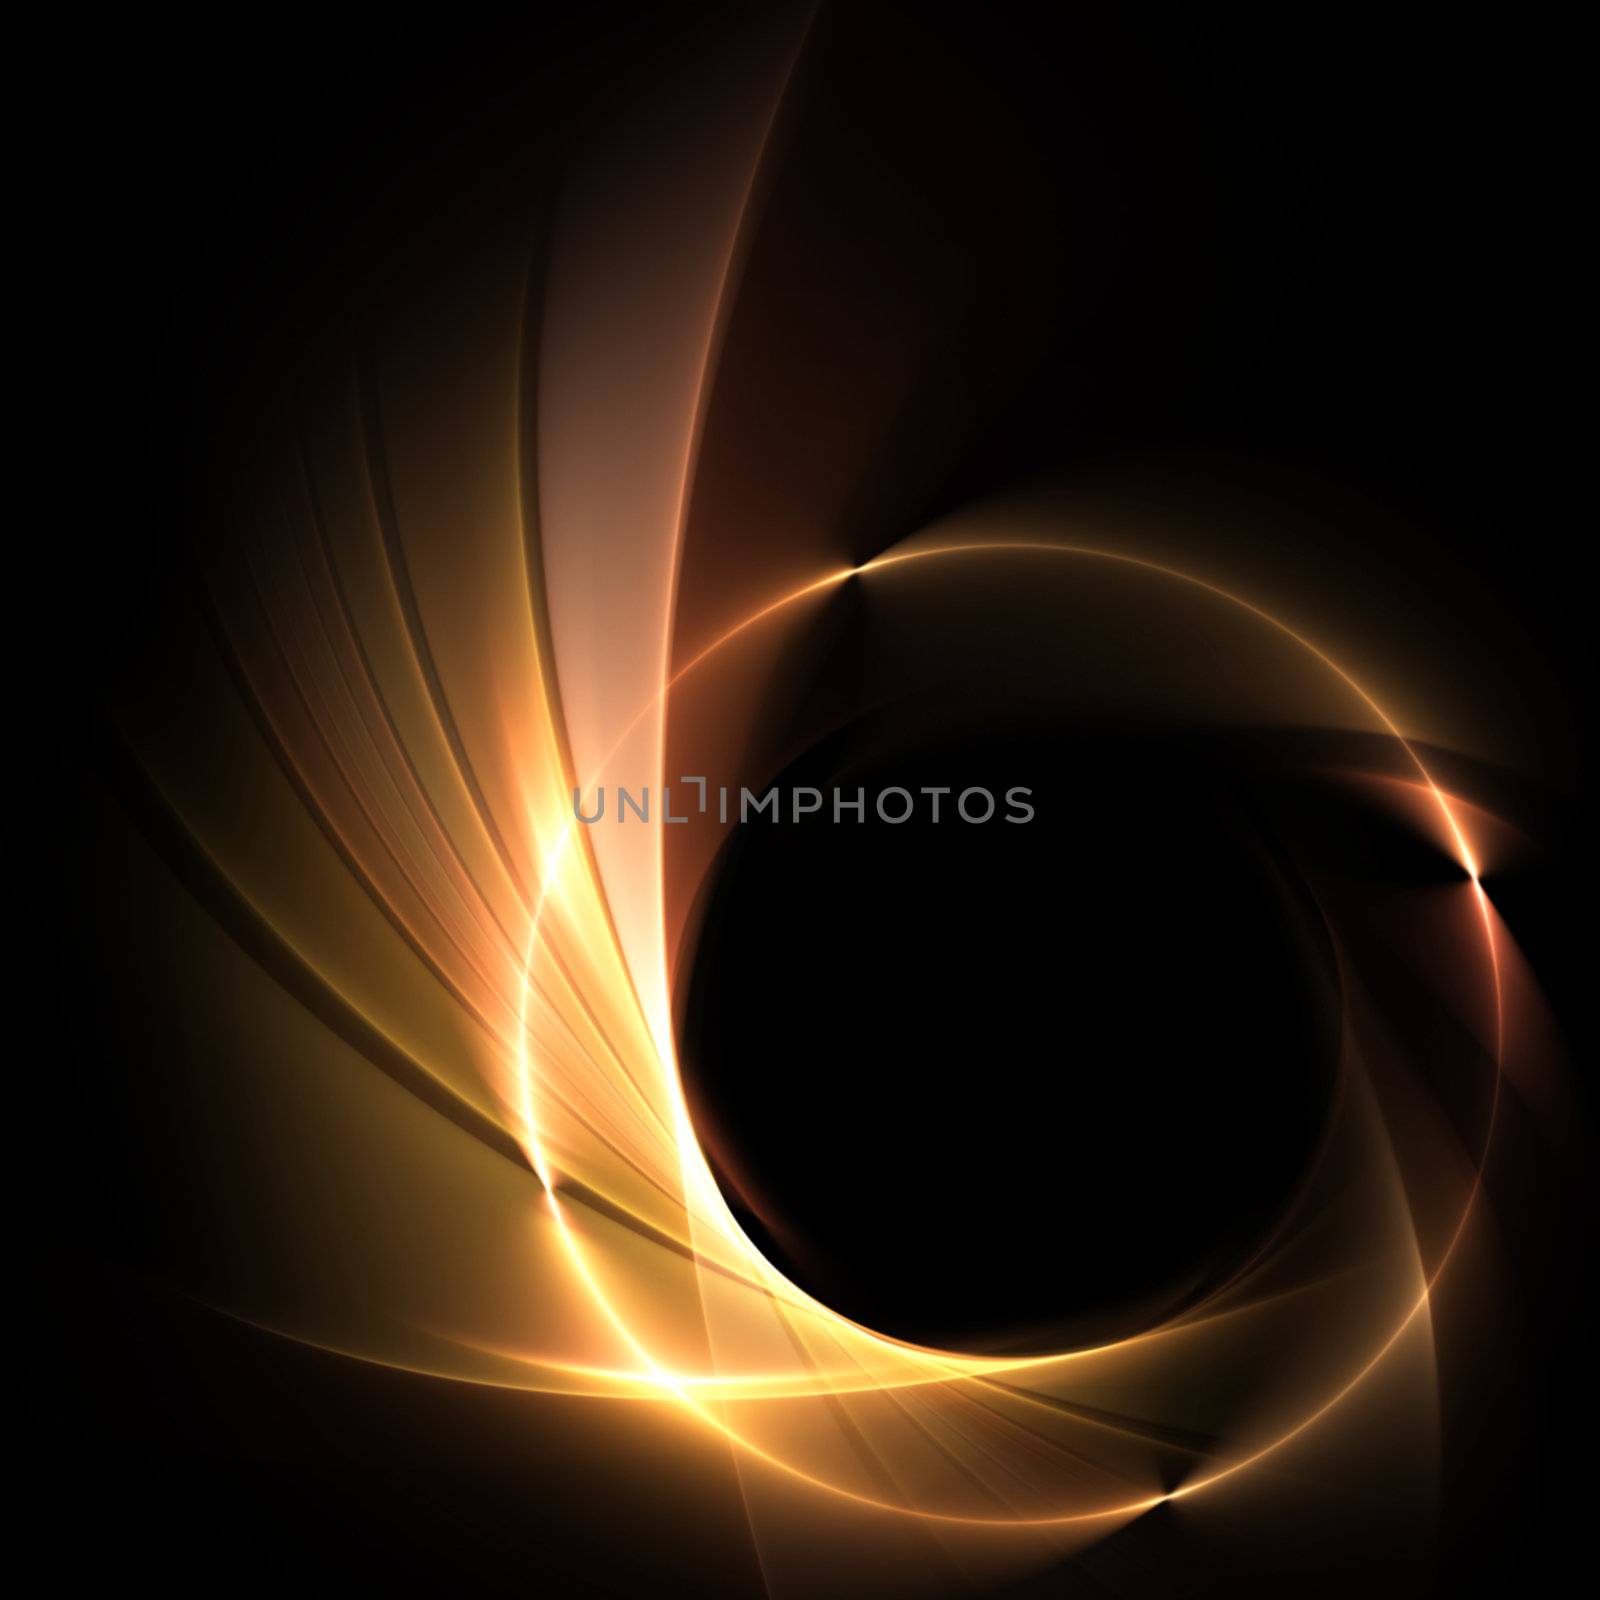 Abstract black background with fractal ring of fire

